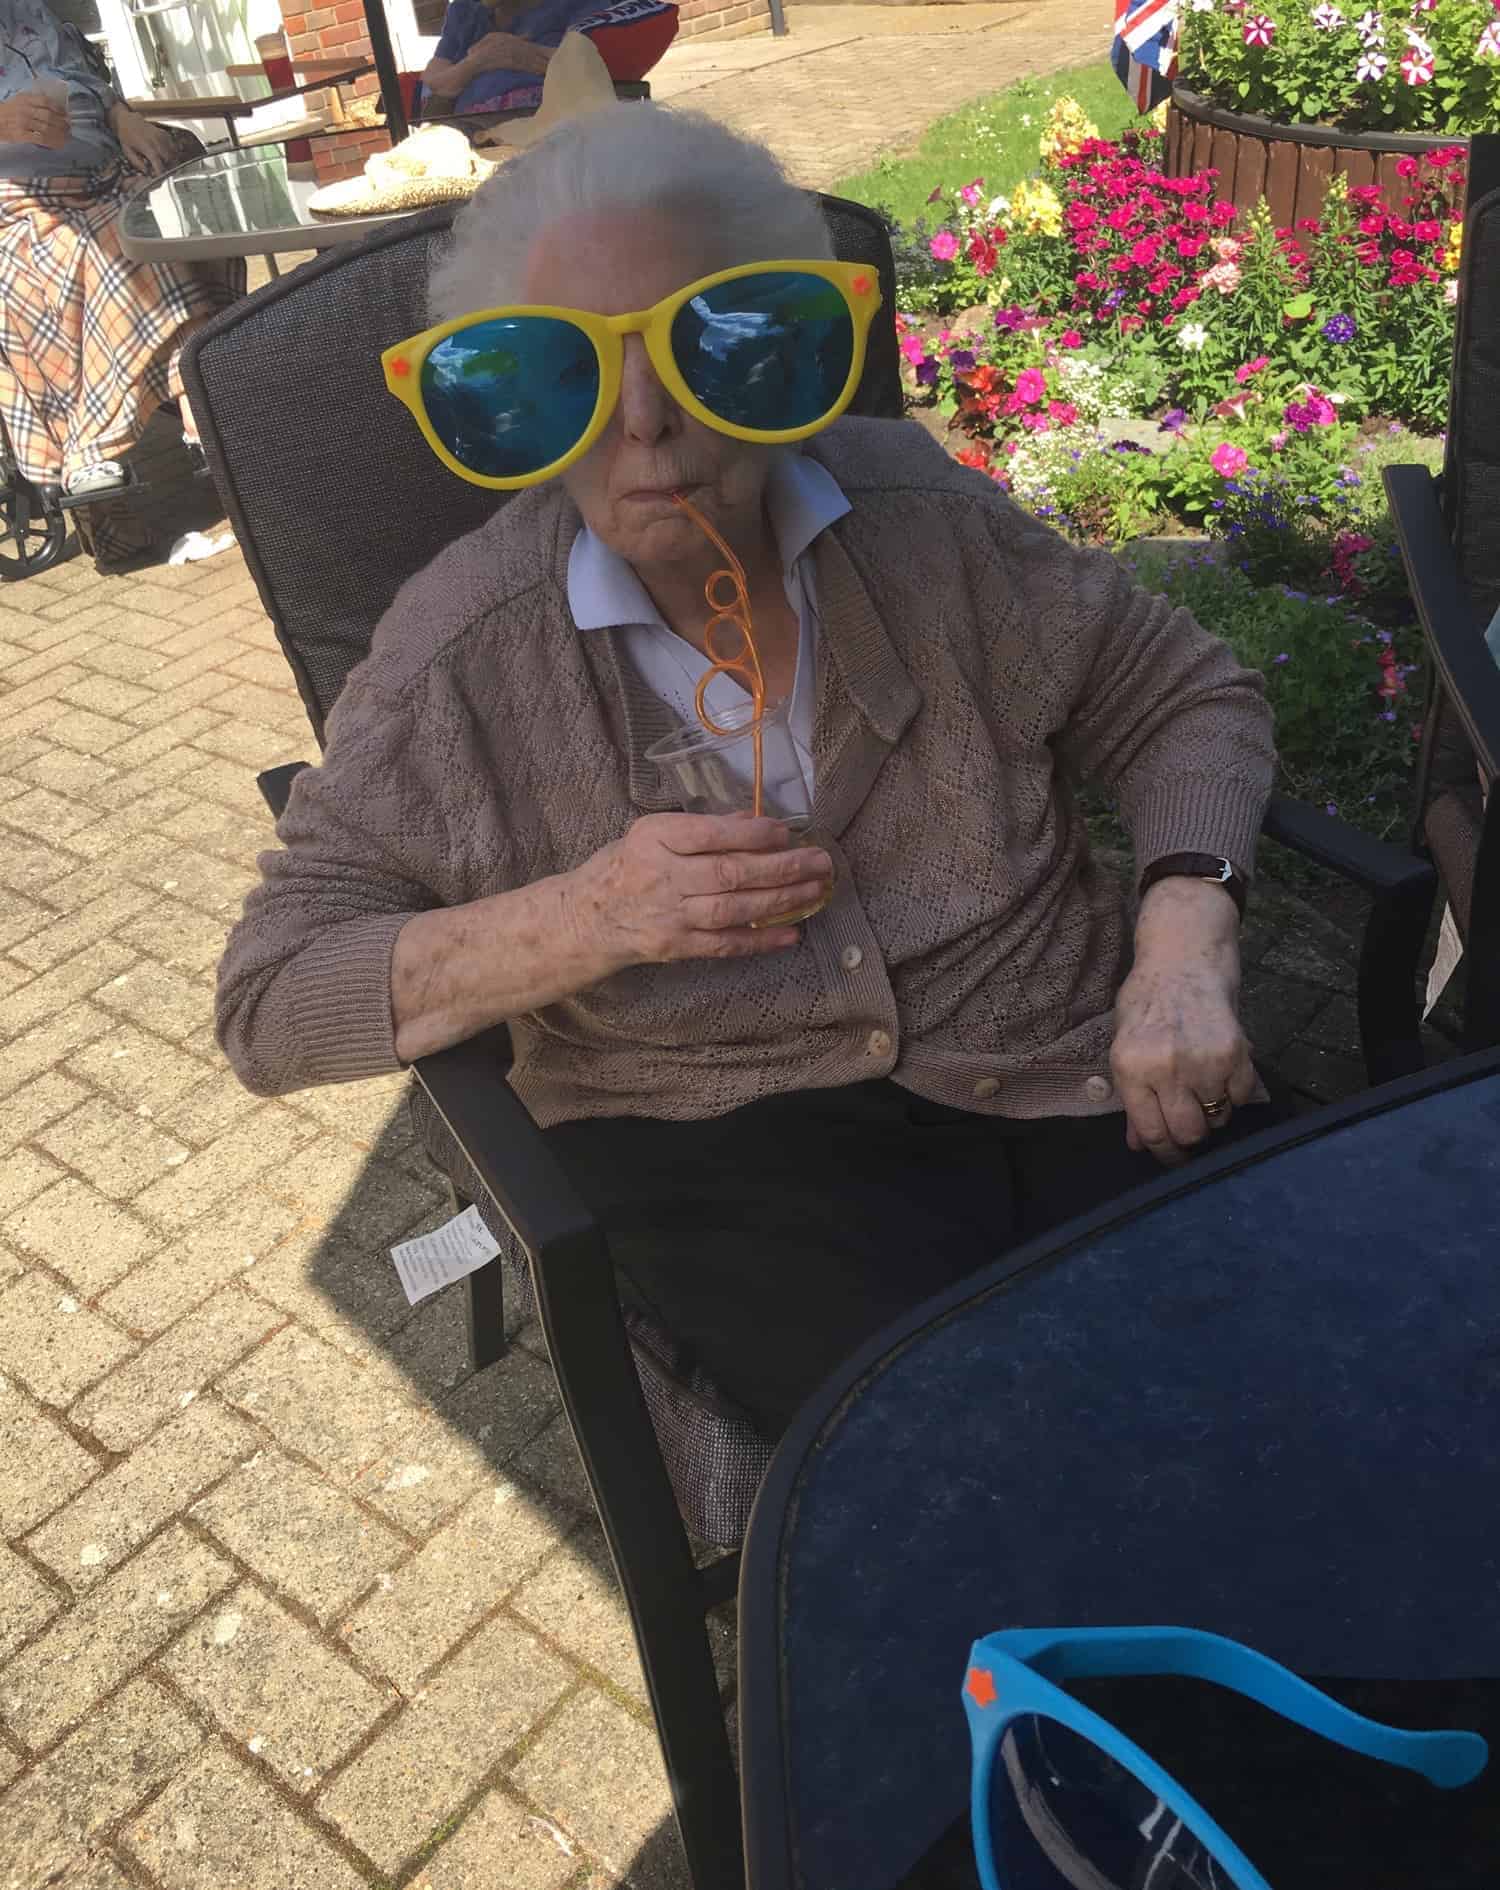 An elderly person enjoying a sunny day outdoors, sporting a pair of oversized, playful sunglasses for a fun, whimsical look at an art gallery.